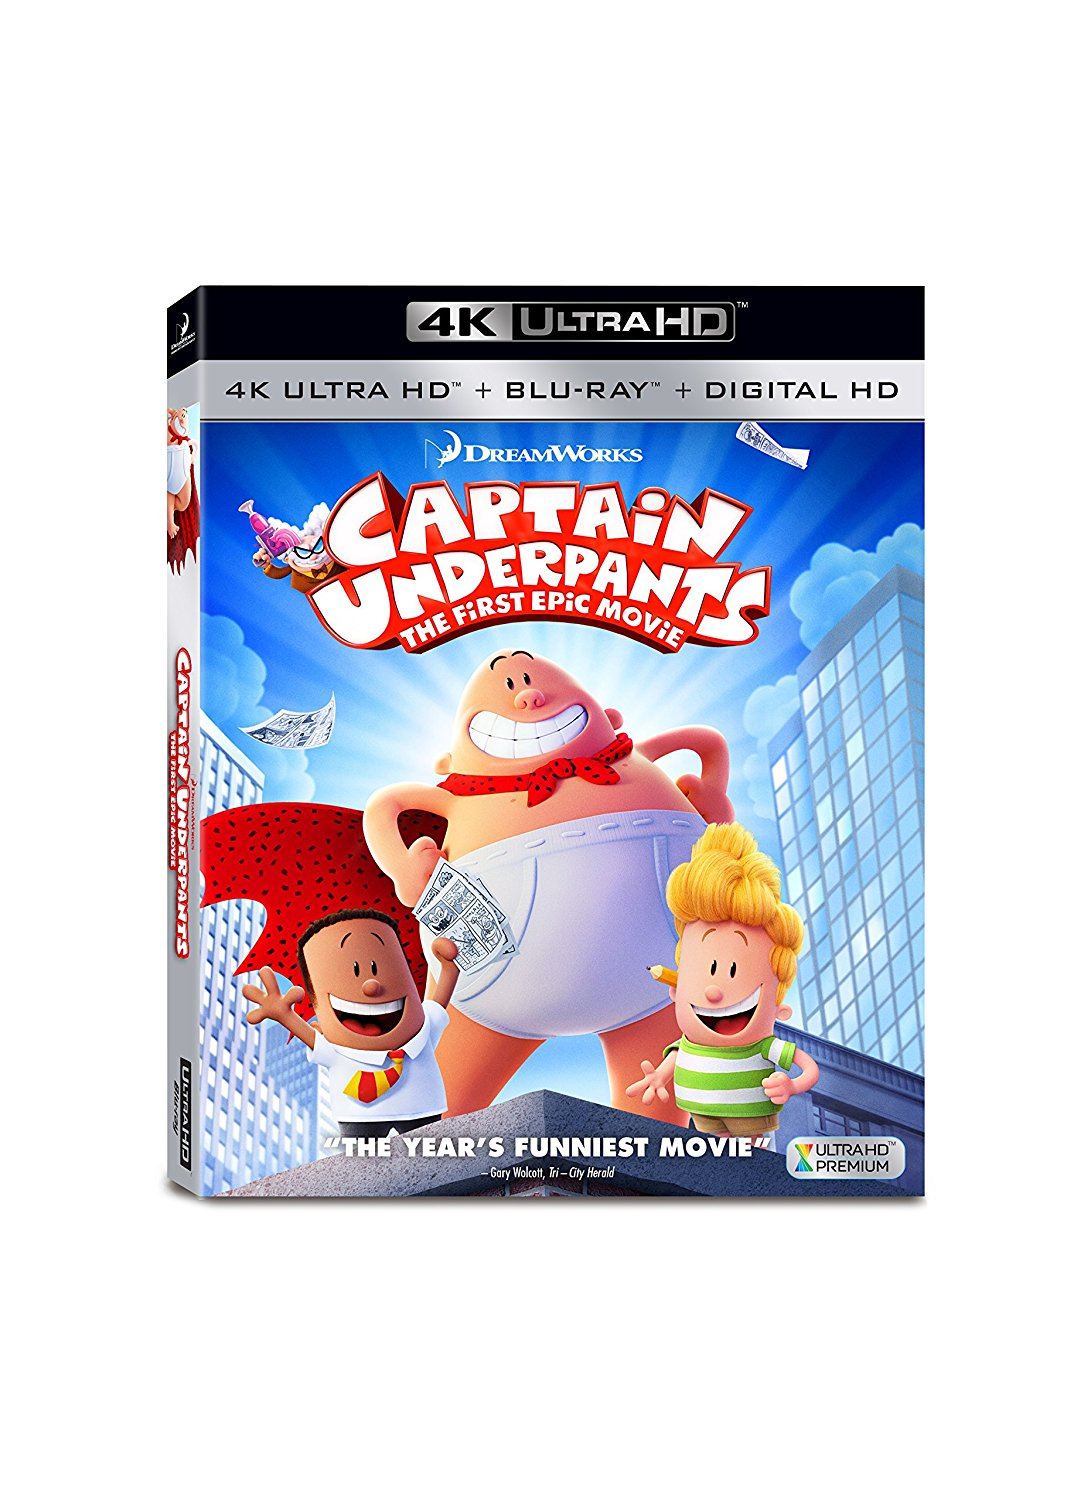 Buy Captain Underpants: The First Epic Movie [4K Ultra HD Blu-ray]